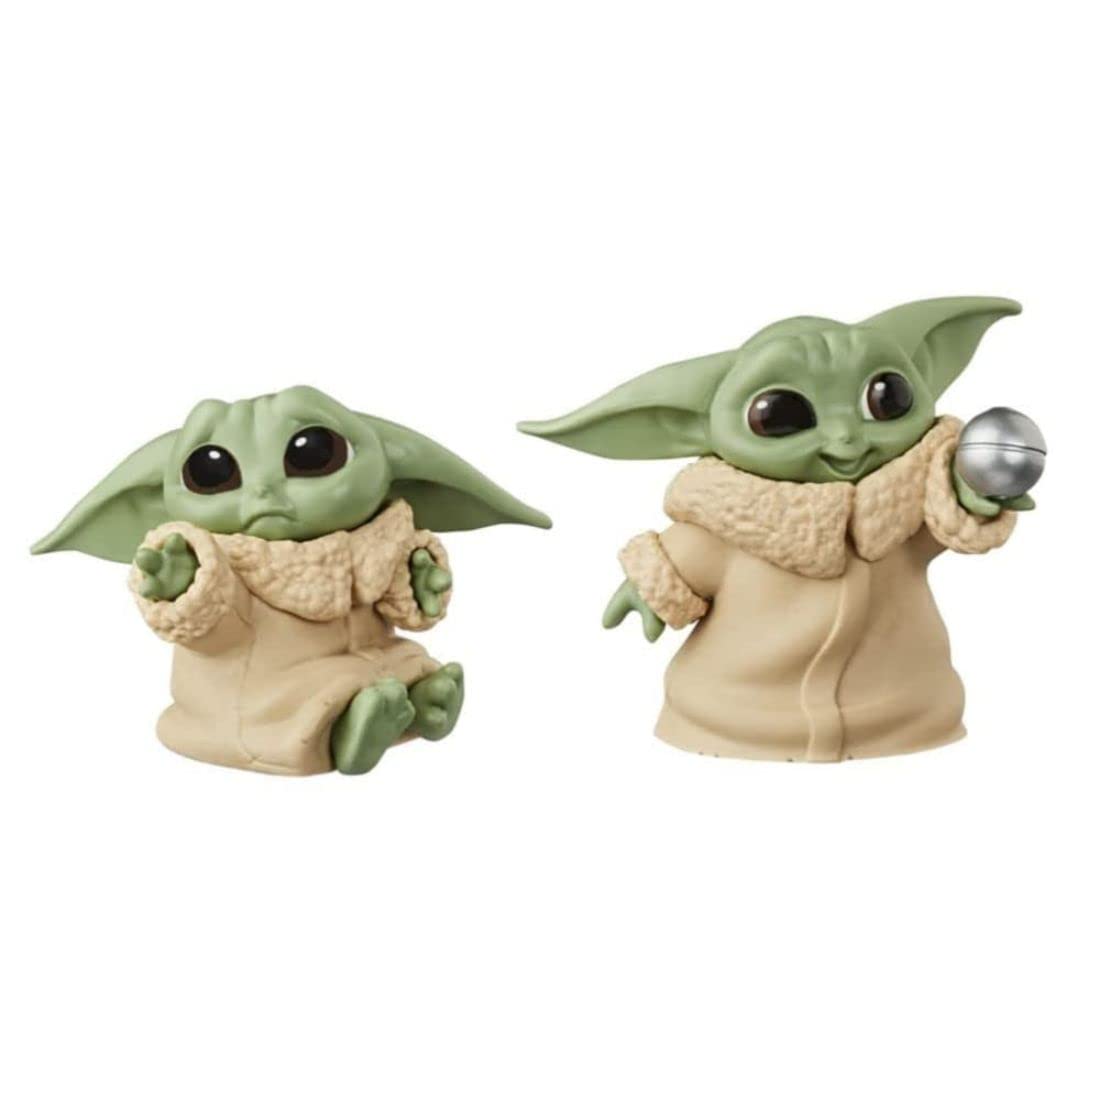 STAR WARS The Bounty Collection The Child Collectible Toys 2.2-Inch The Mandalorian “Baby Yoda” Don’t Leave, Ball Toy Figure 2-Pack